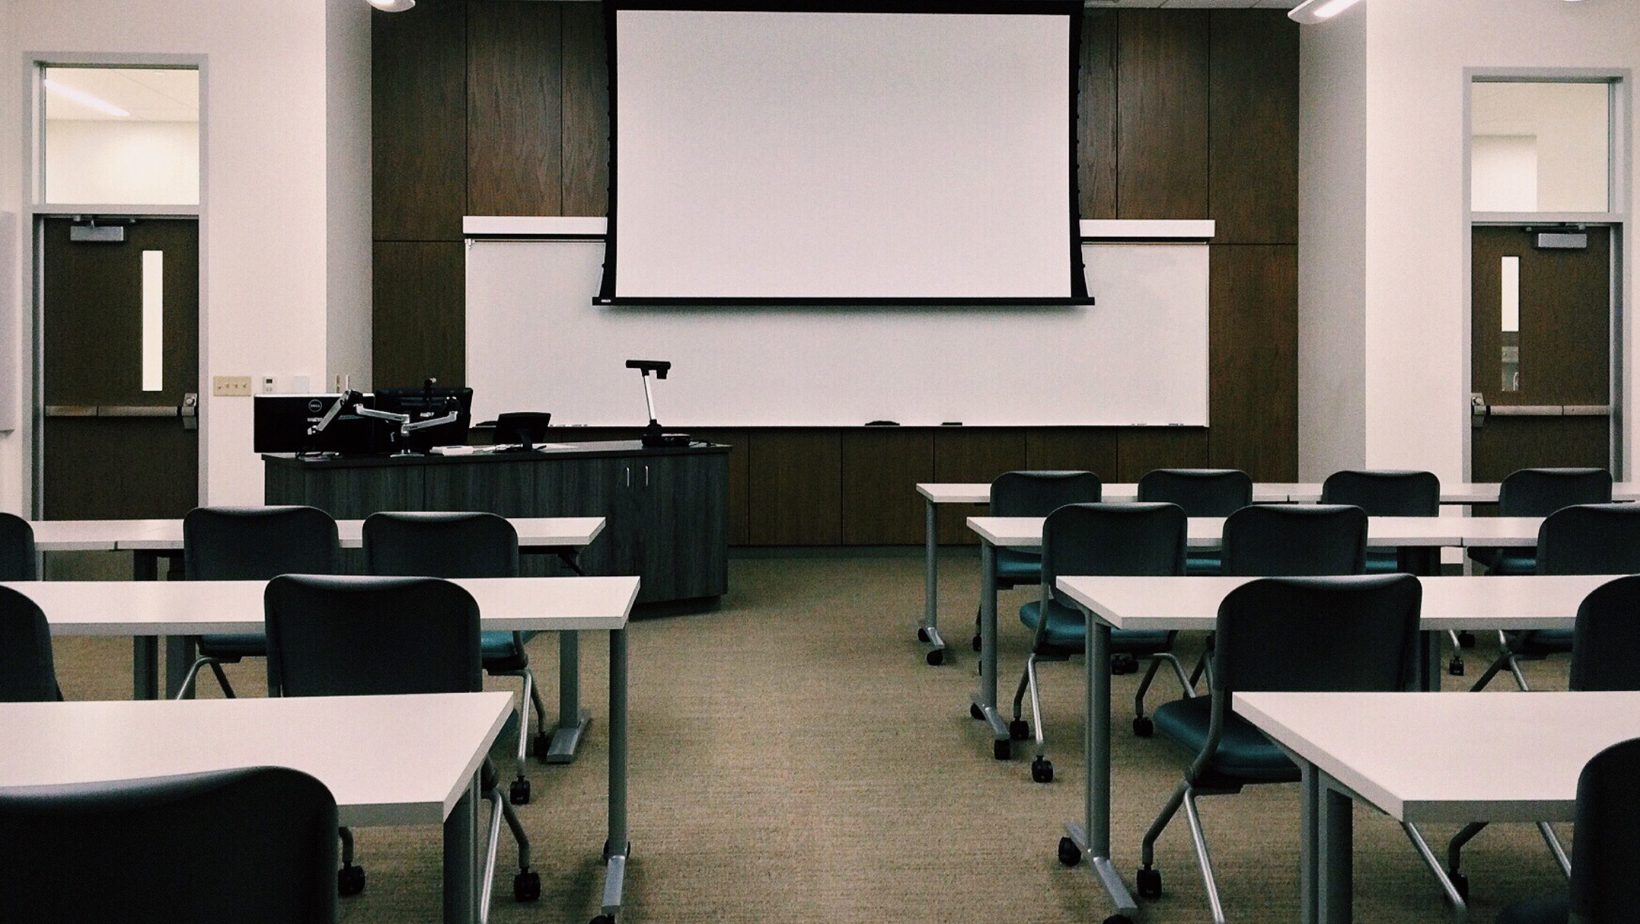 Empty classroom with long tables and chairs and a projector screen